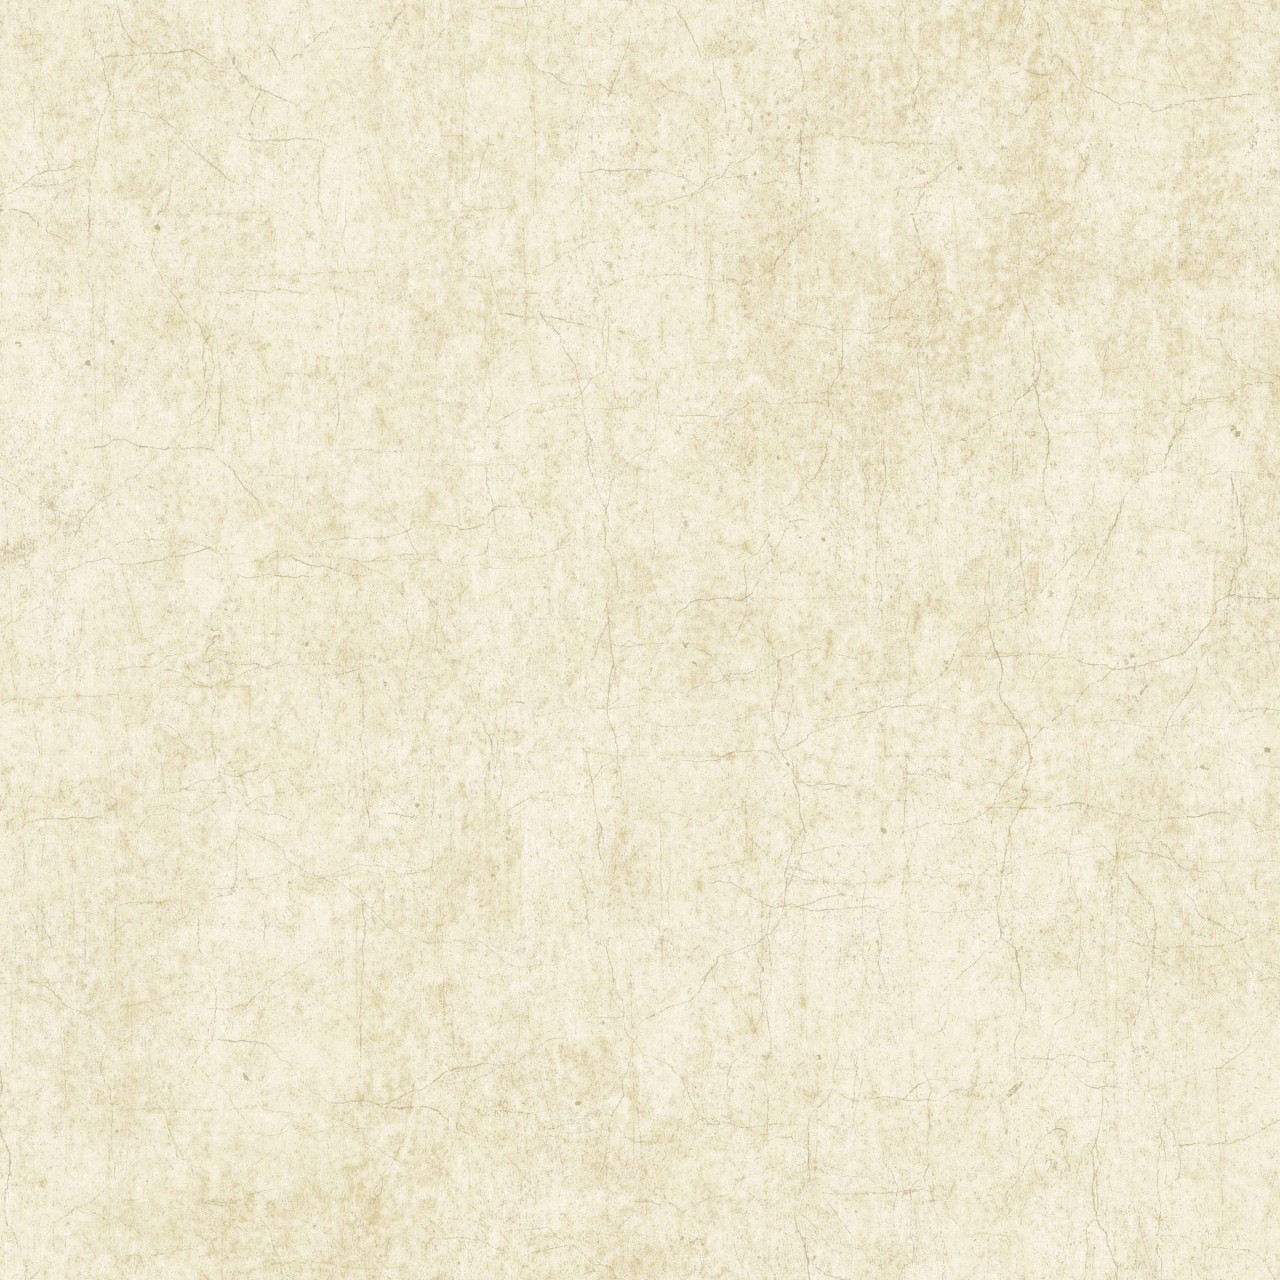 Buy Cream  Off White on Taupe Textured NonWoven Paper Sea Escape Coral  Bay Wallpaper by Nilaya by Asian Paints Online  Natural  Floral Wallpapers   Wallpapers  Furnishings  Pepperfry Product